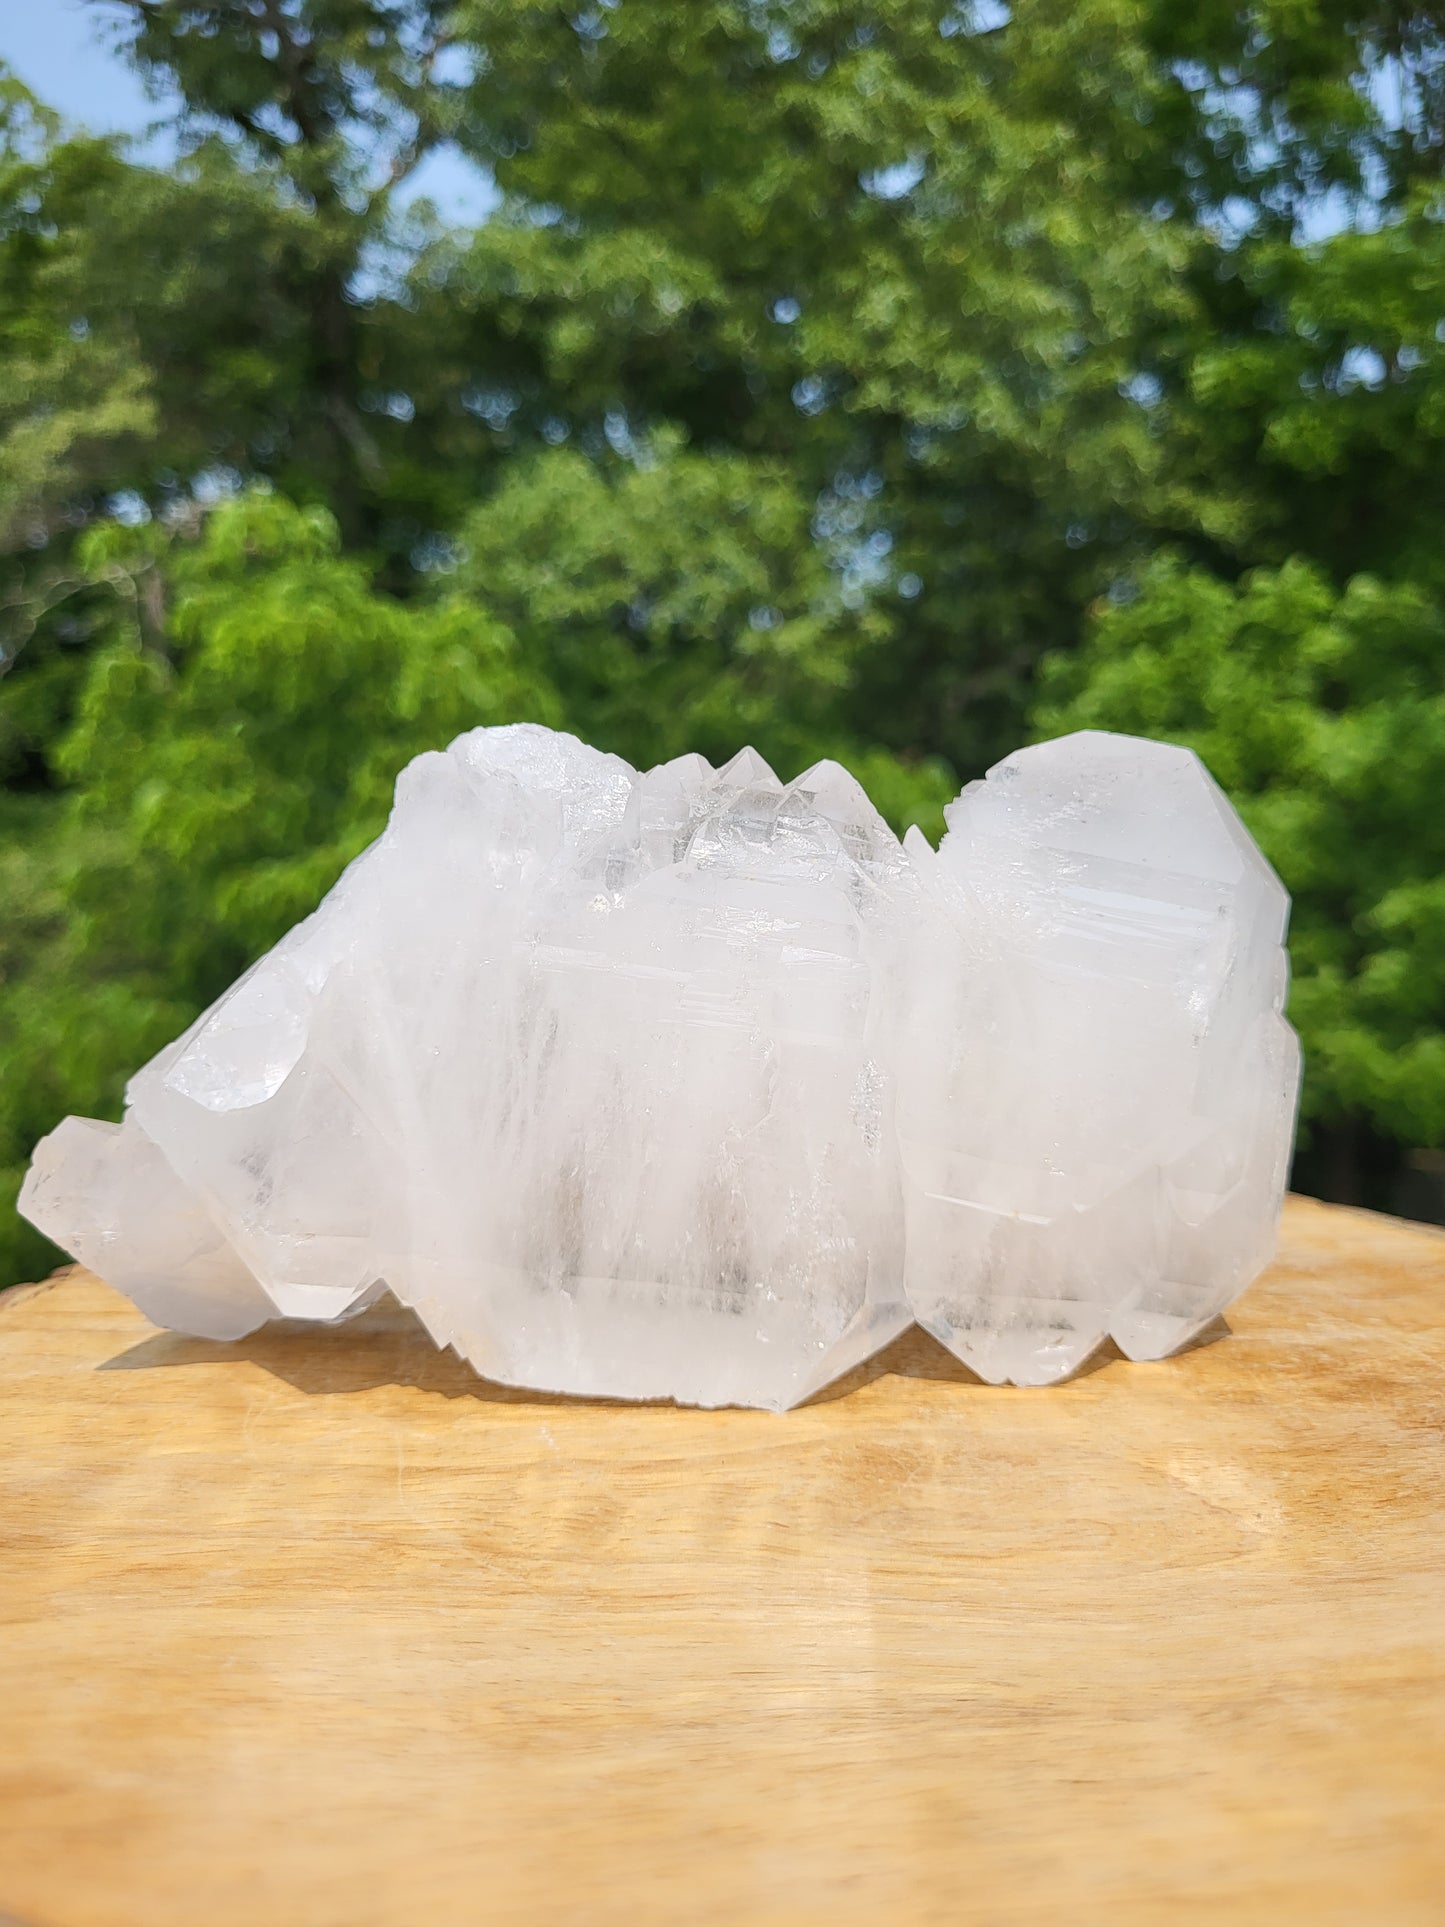 Large Faden Quartz with "milky" appearance